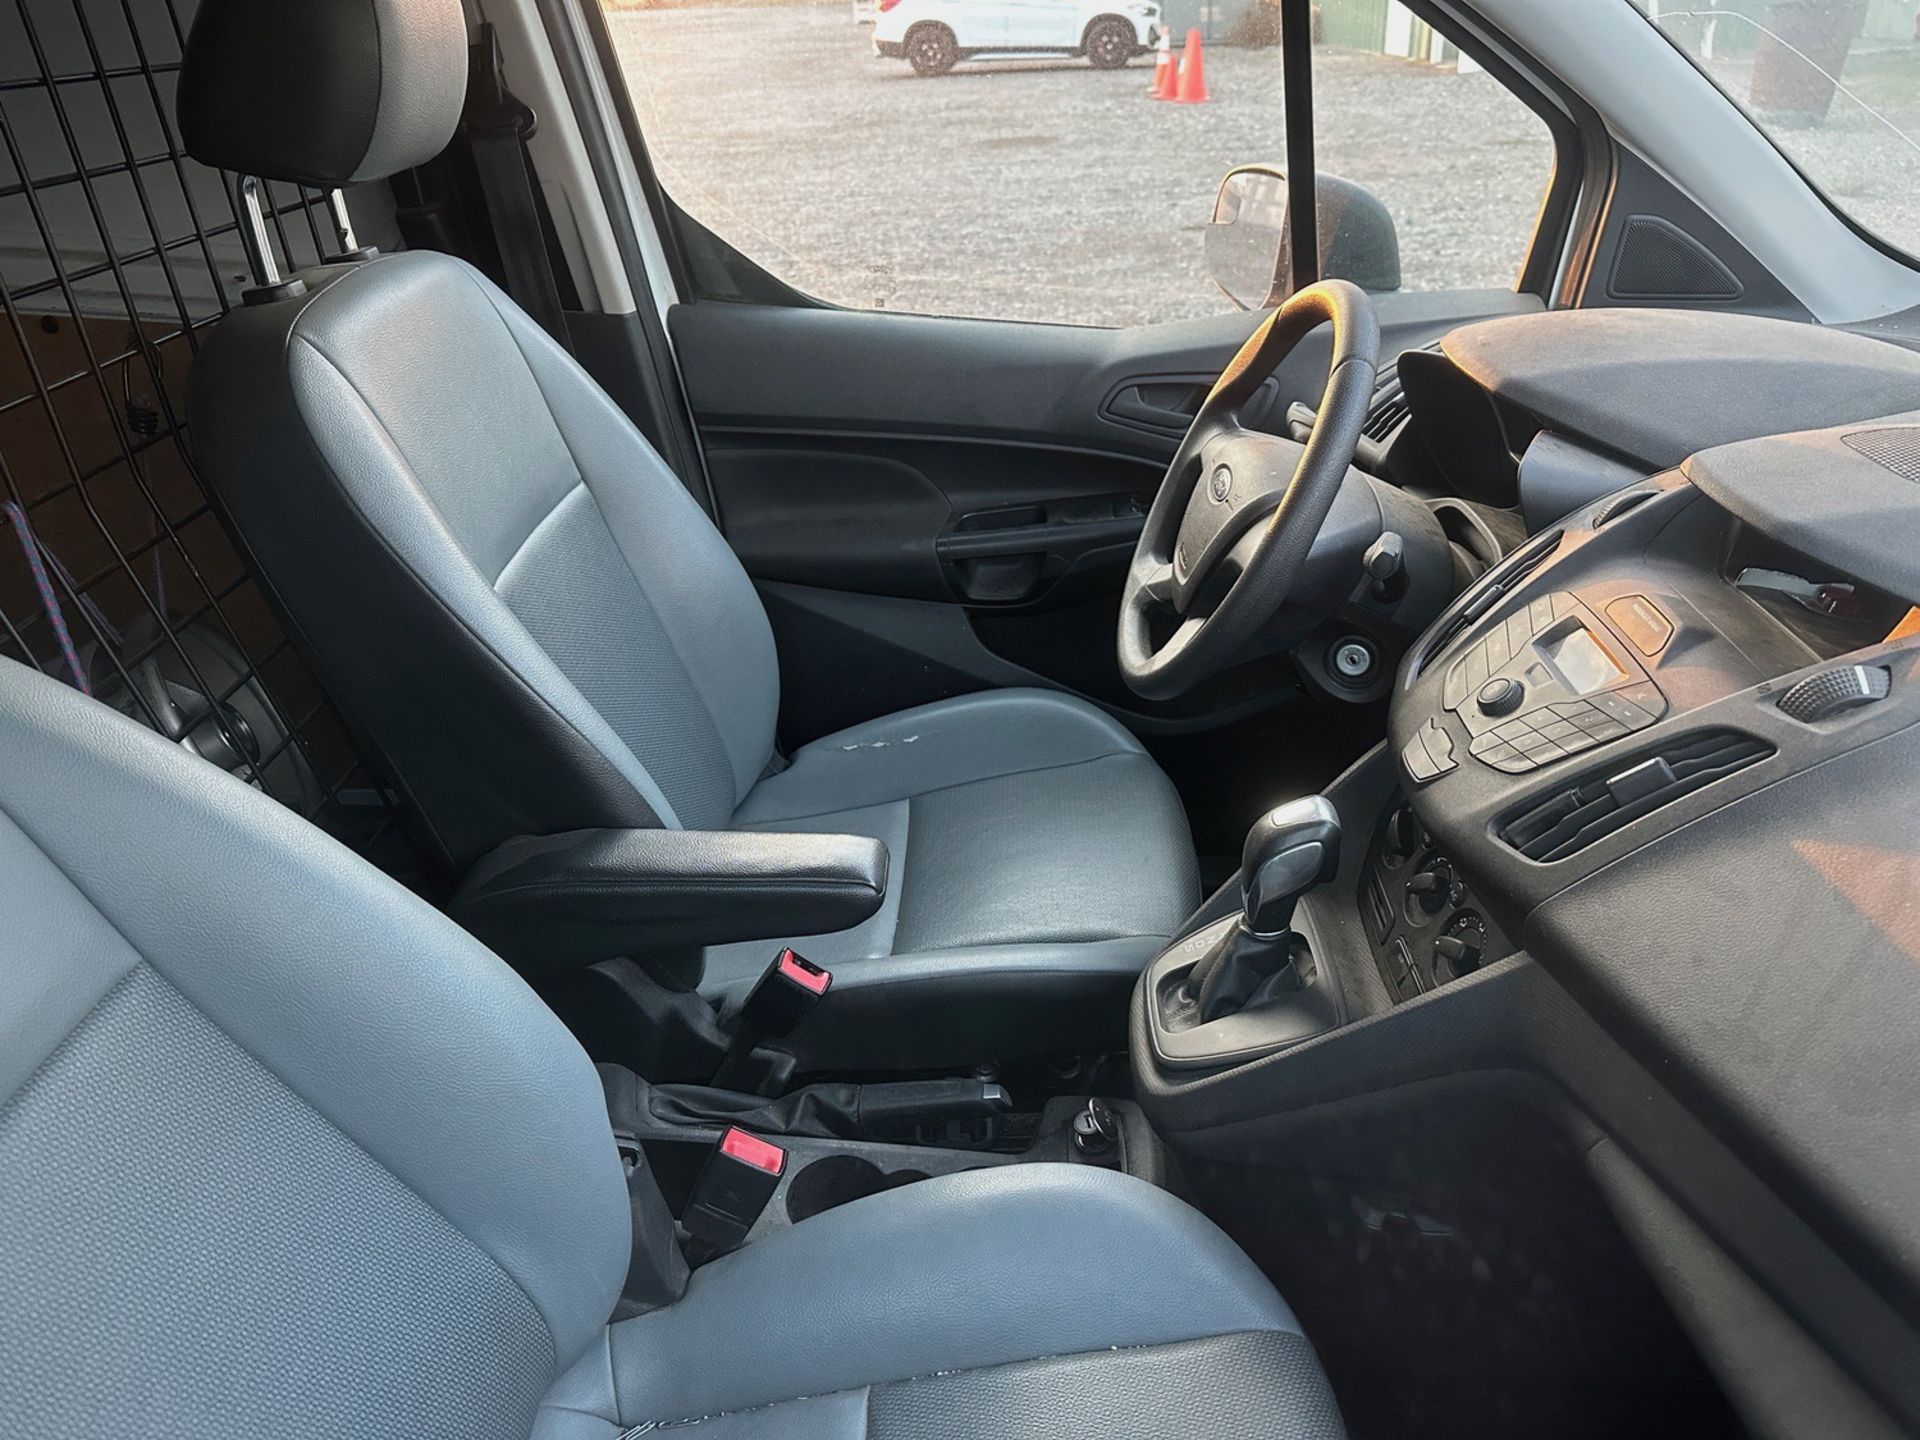 2016 Ford Transit Connect Delivery Van, Current Miles: 107,849, VIN: NM0LS7E72G1236687 | Rig Fee $75 - Image 4 of 6